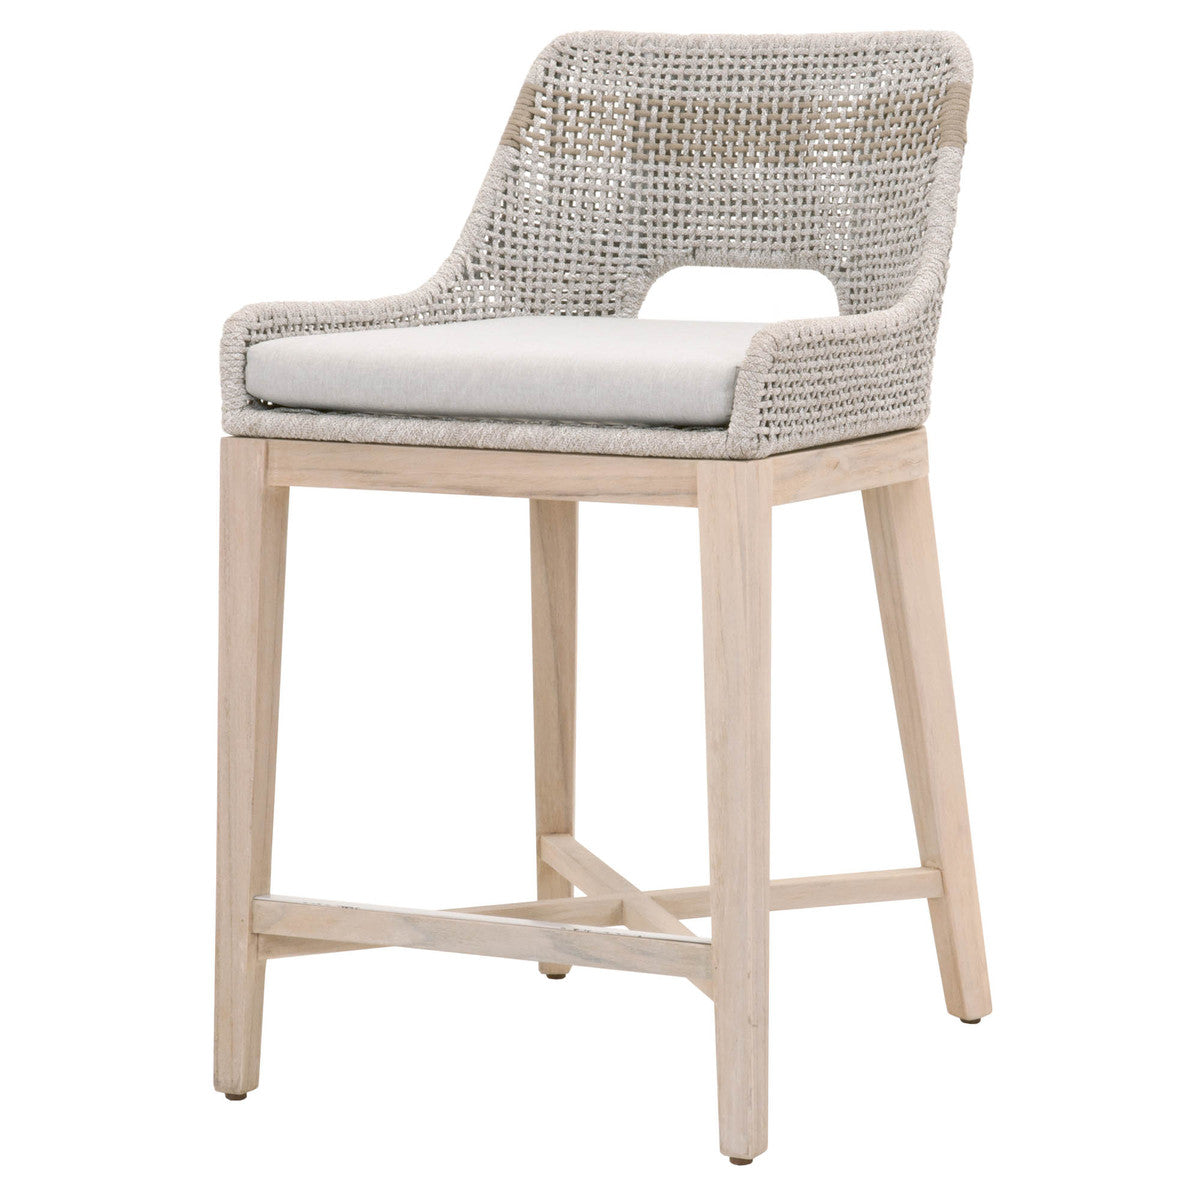 Strie Outdoor Counter Stool - Taupe